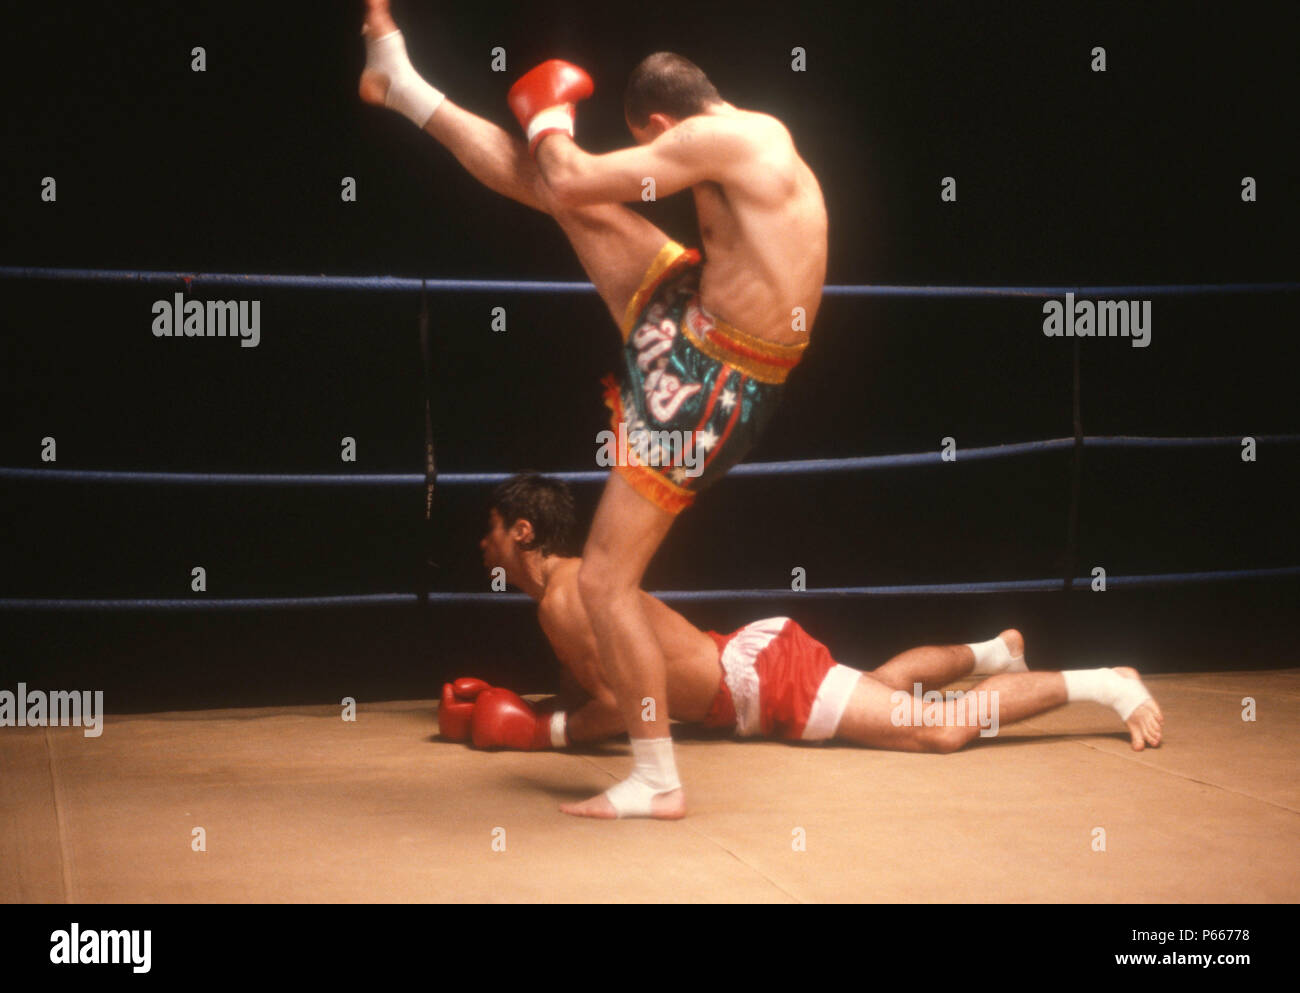 LOS ANGELES, CA - DECEMBER 7: (EXCLUSIVE) Actor John Haymes Newton, aka John Newton and fighter Ronny Flas on set of 'Desert Kickboxer' on December 7, 1991 in Los Angeles, California. Photo by Barry King/Alamy Stock Photo Stock Photo